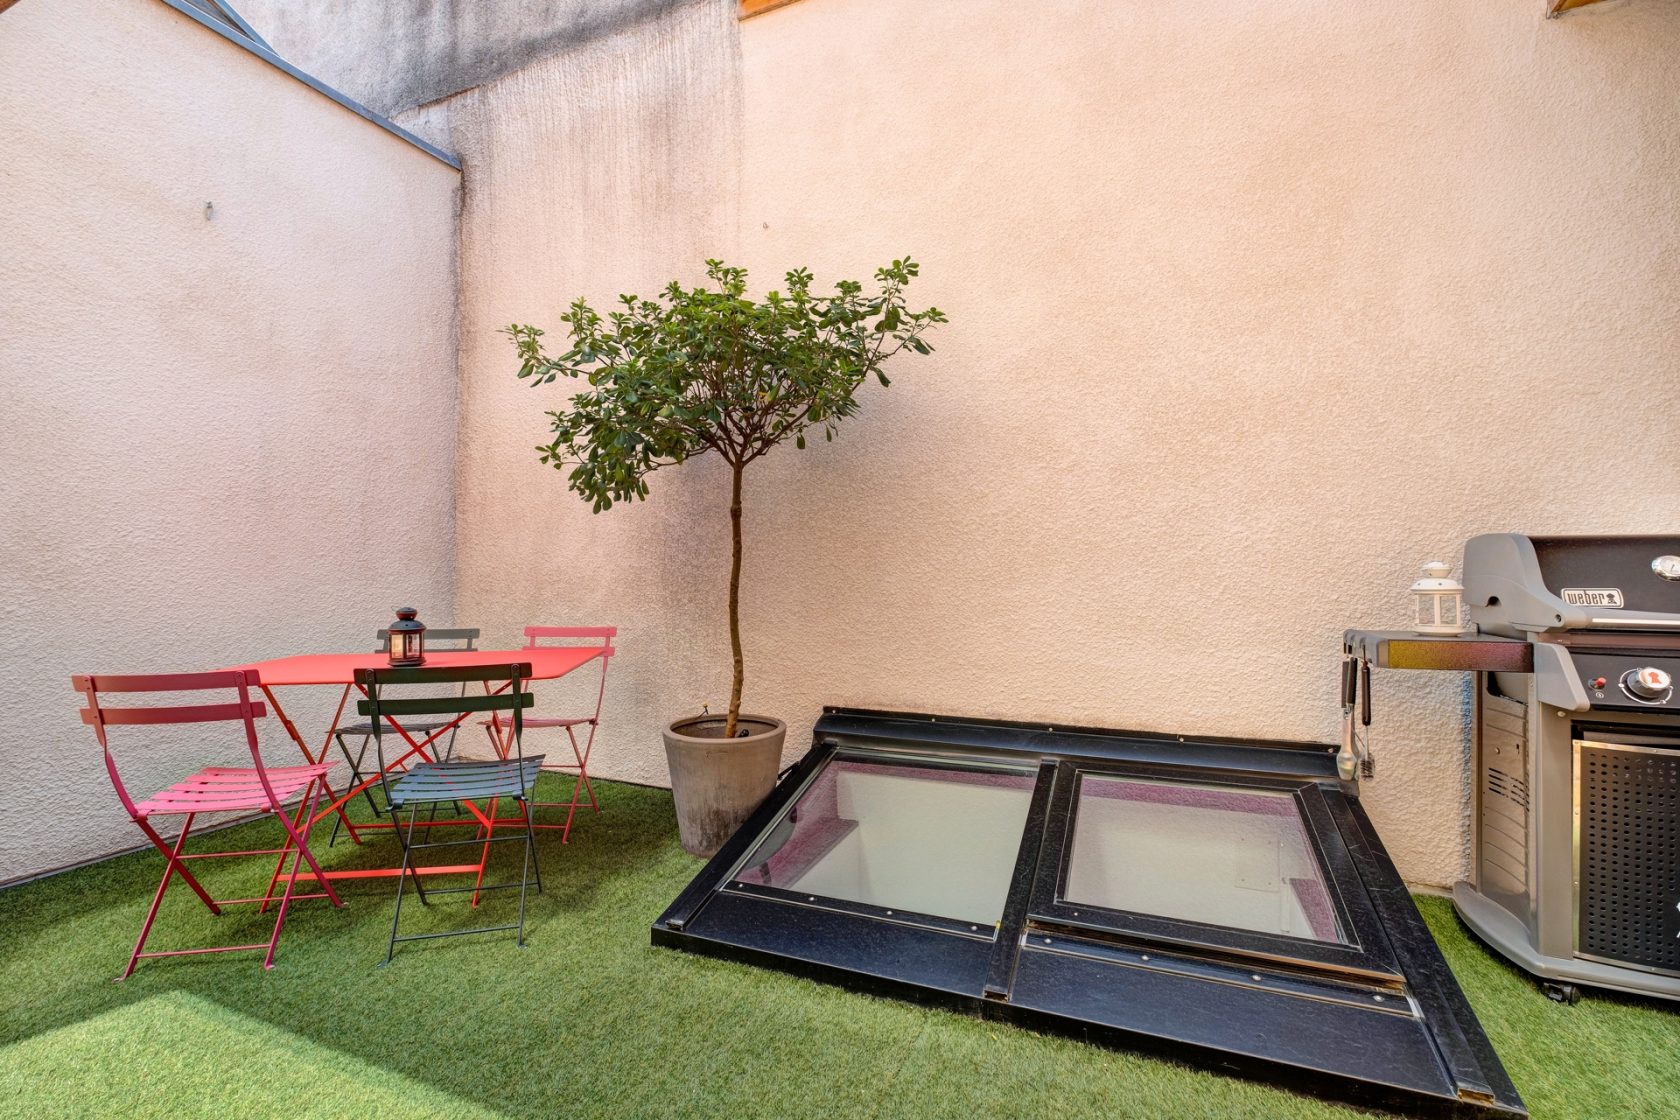 Inverted triplex with patio